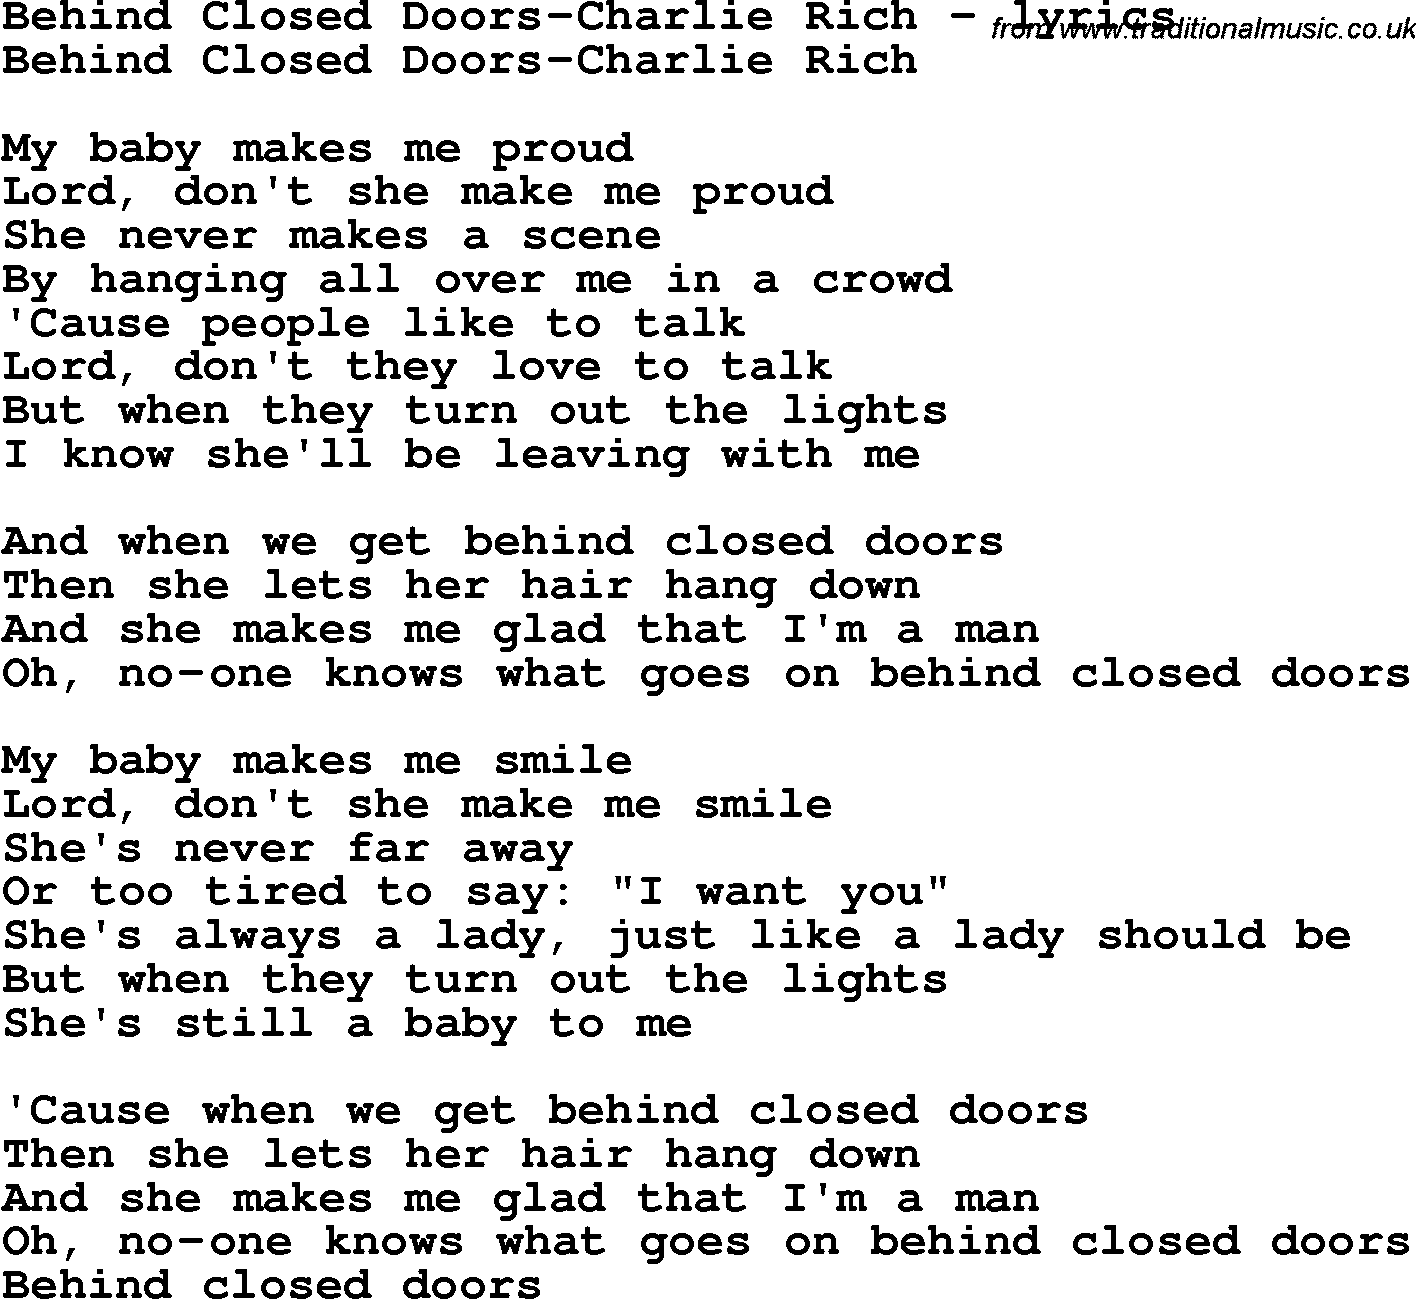 Love Song Lyrics for: Behind Closed Doors-Charlie Rich